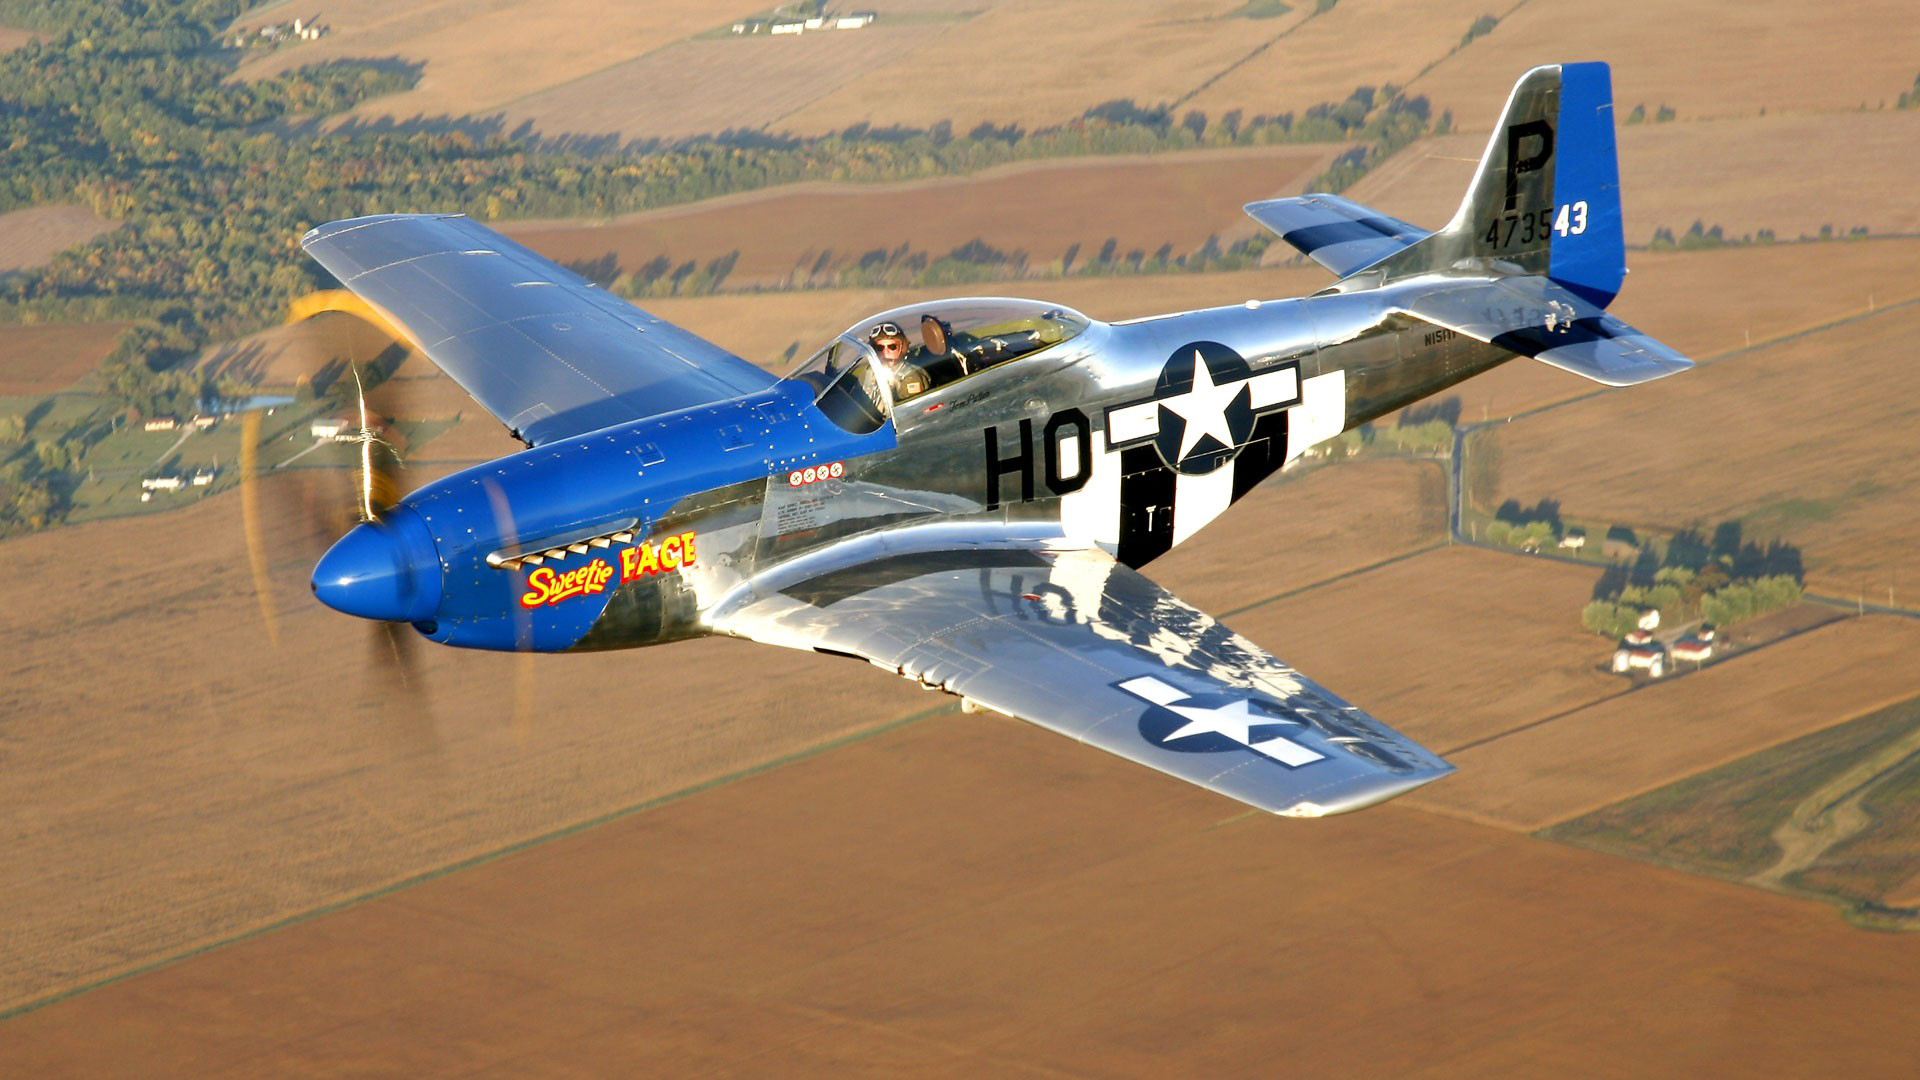 1920x1080 Military historical club airplane North American P-51 Mustang wallpaper | | 178518